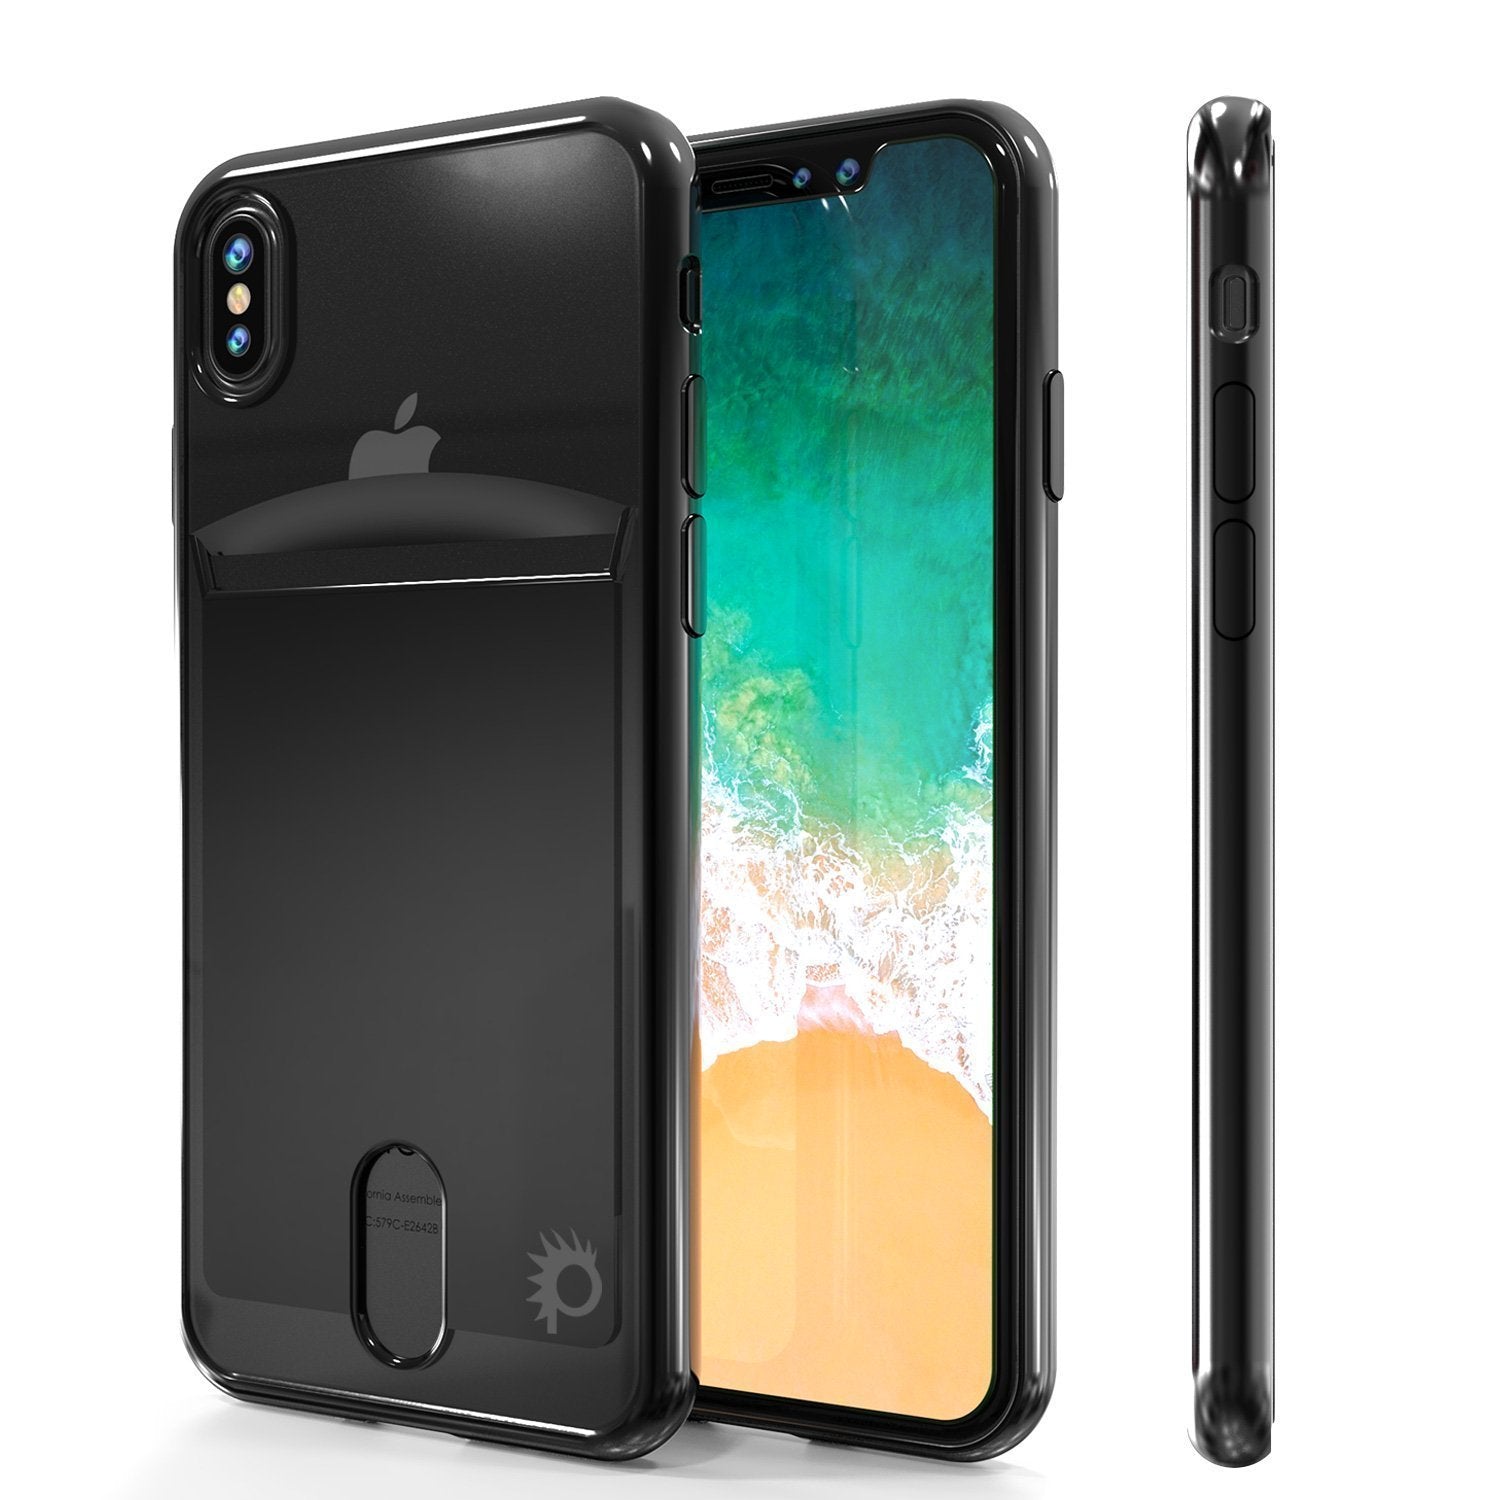 iPhone X Case, PUNKcase [LUCID Series] Slim Fit Protective Dual Layer Armor Cover W/ Scratch Resistant PUNKSHIELD Screen Protector [Black]